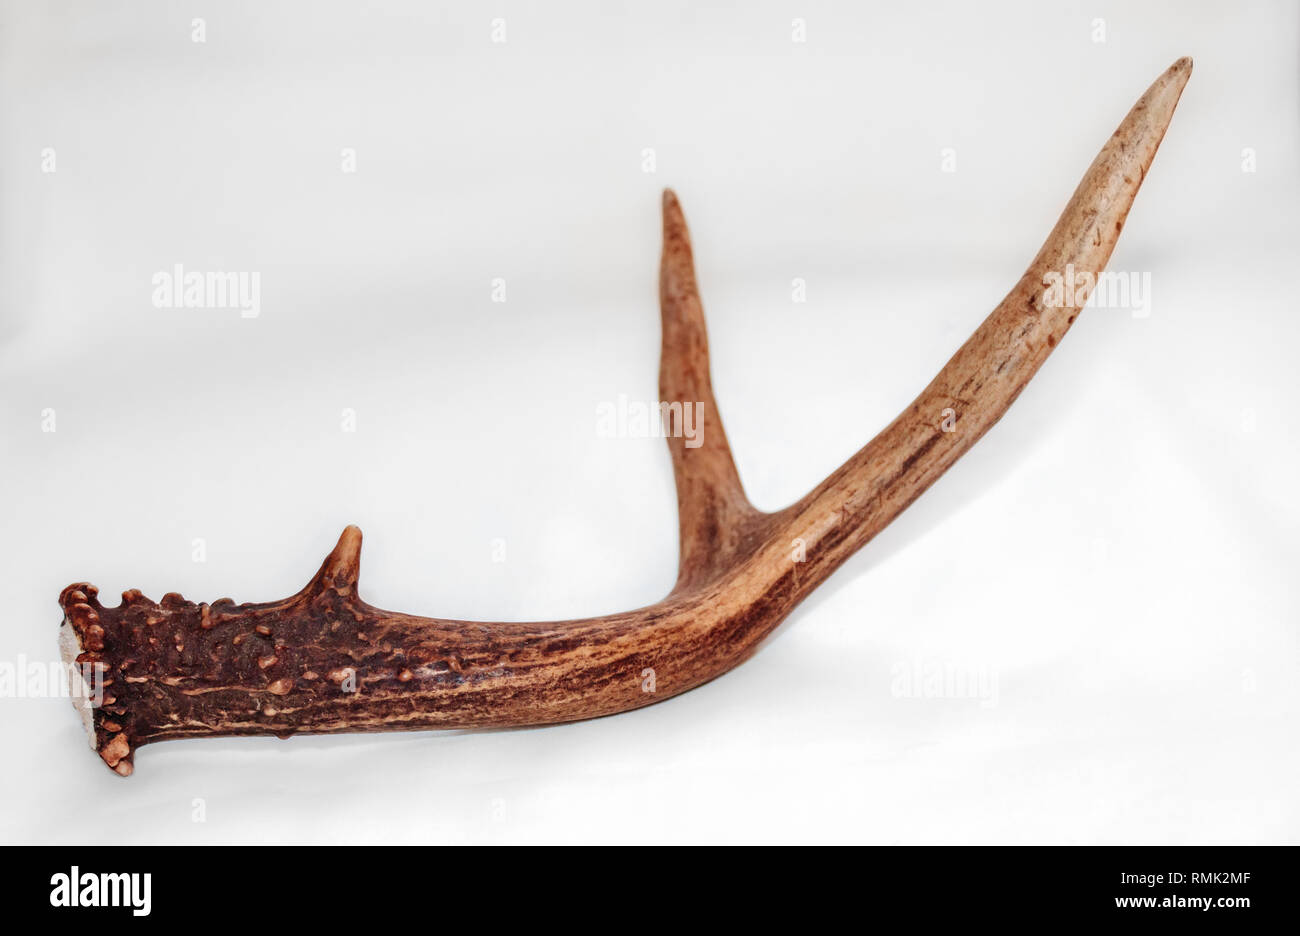 A single antler shed from a male Blacktail deer is set against a plain white background in natural light, providing contrasts in texture and color. Stock Photo